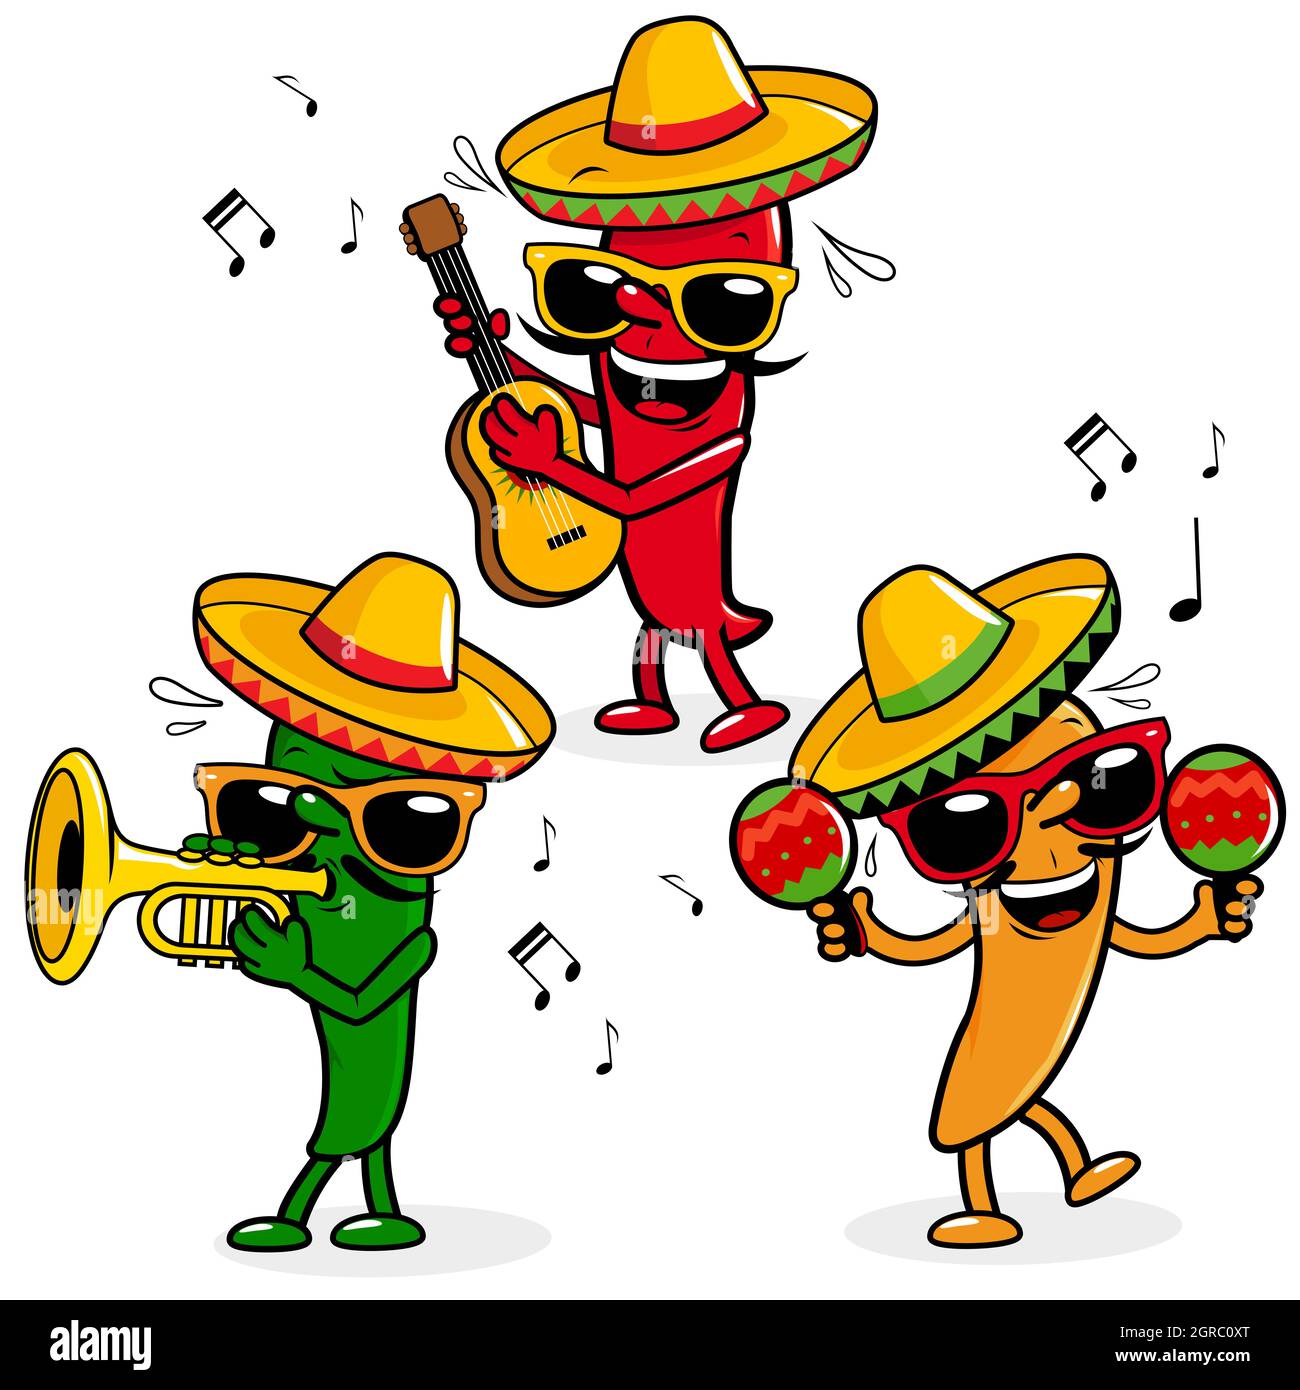 Cartoon fresh hot mariachi peppers with sombreros, playing music. Stock Photo